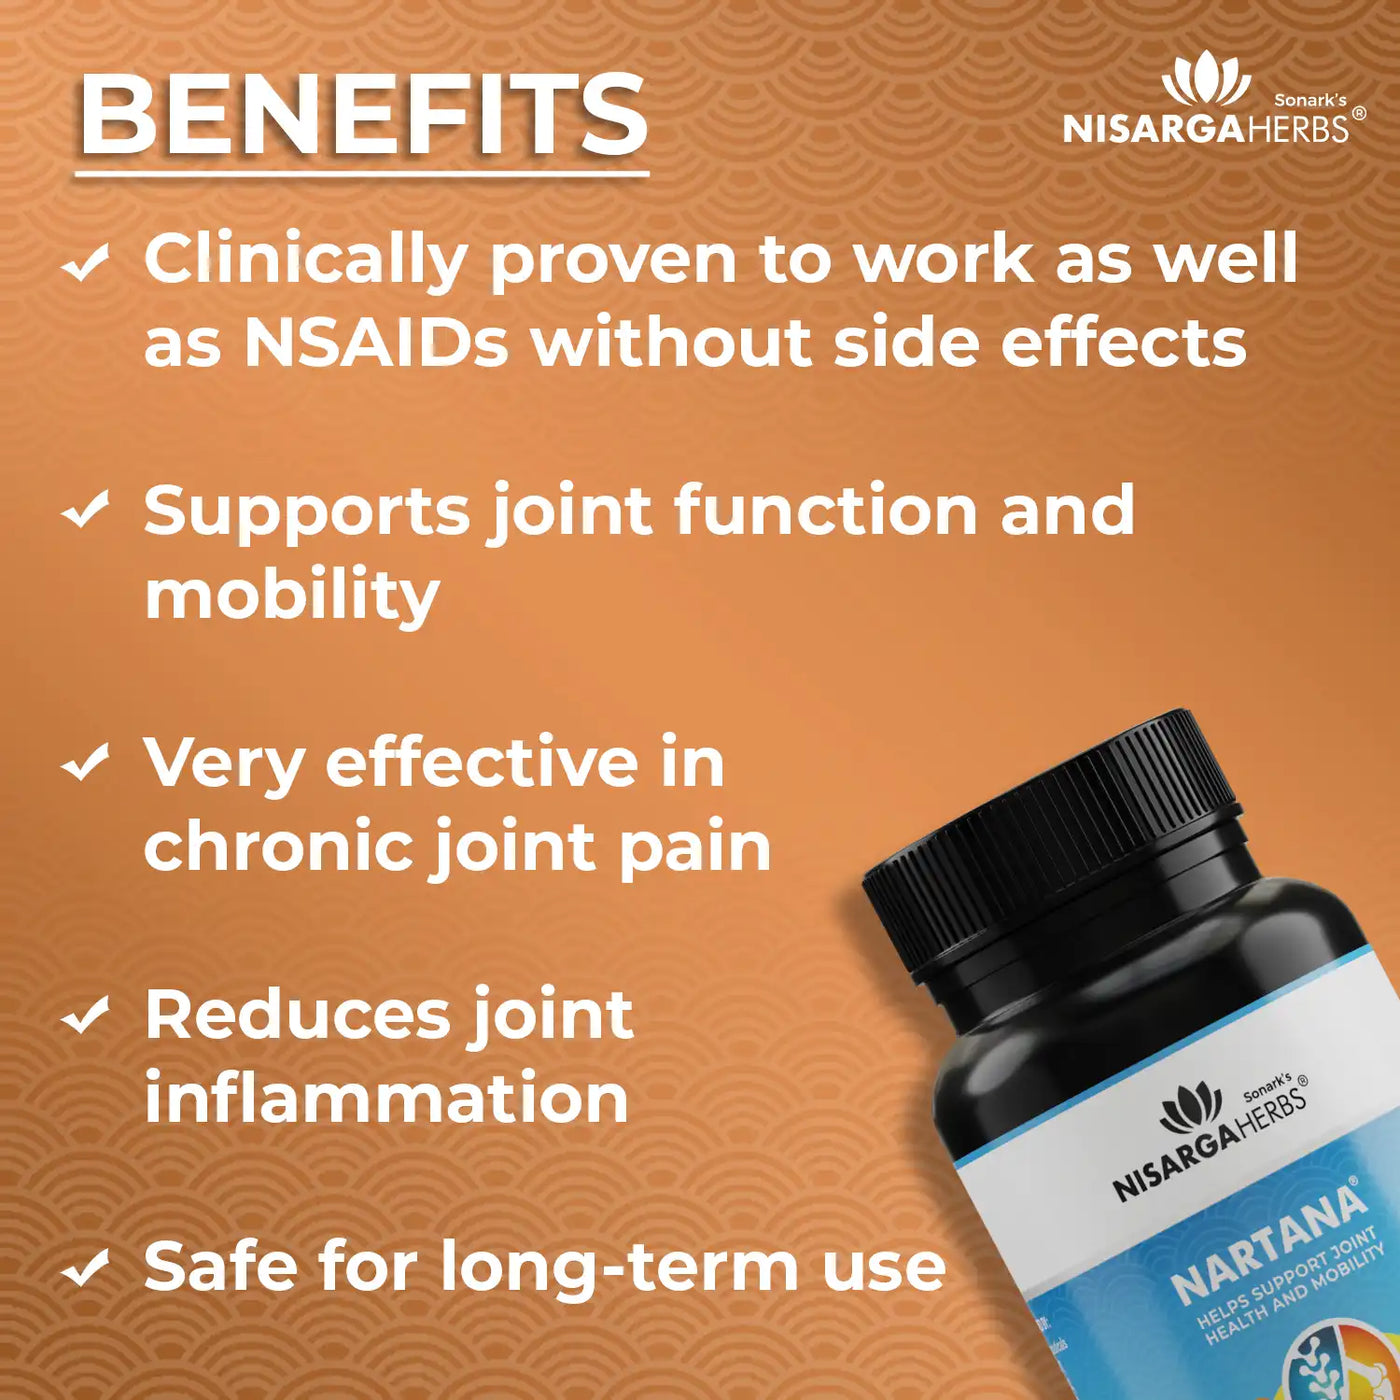 powerful ayurvedic medicine to reduce arthritis symptoms, support joint function, reduce pain and inflammation. 